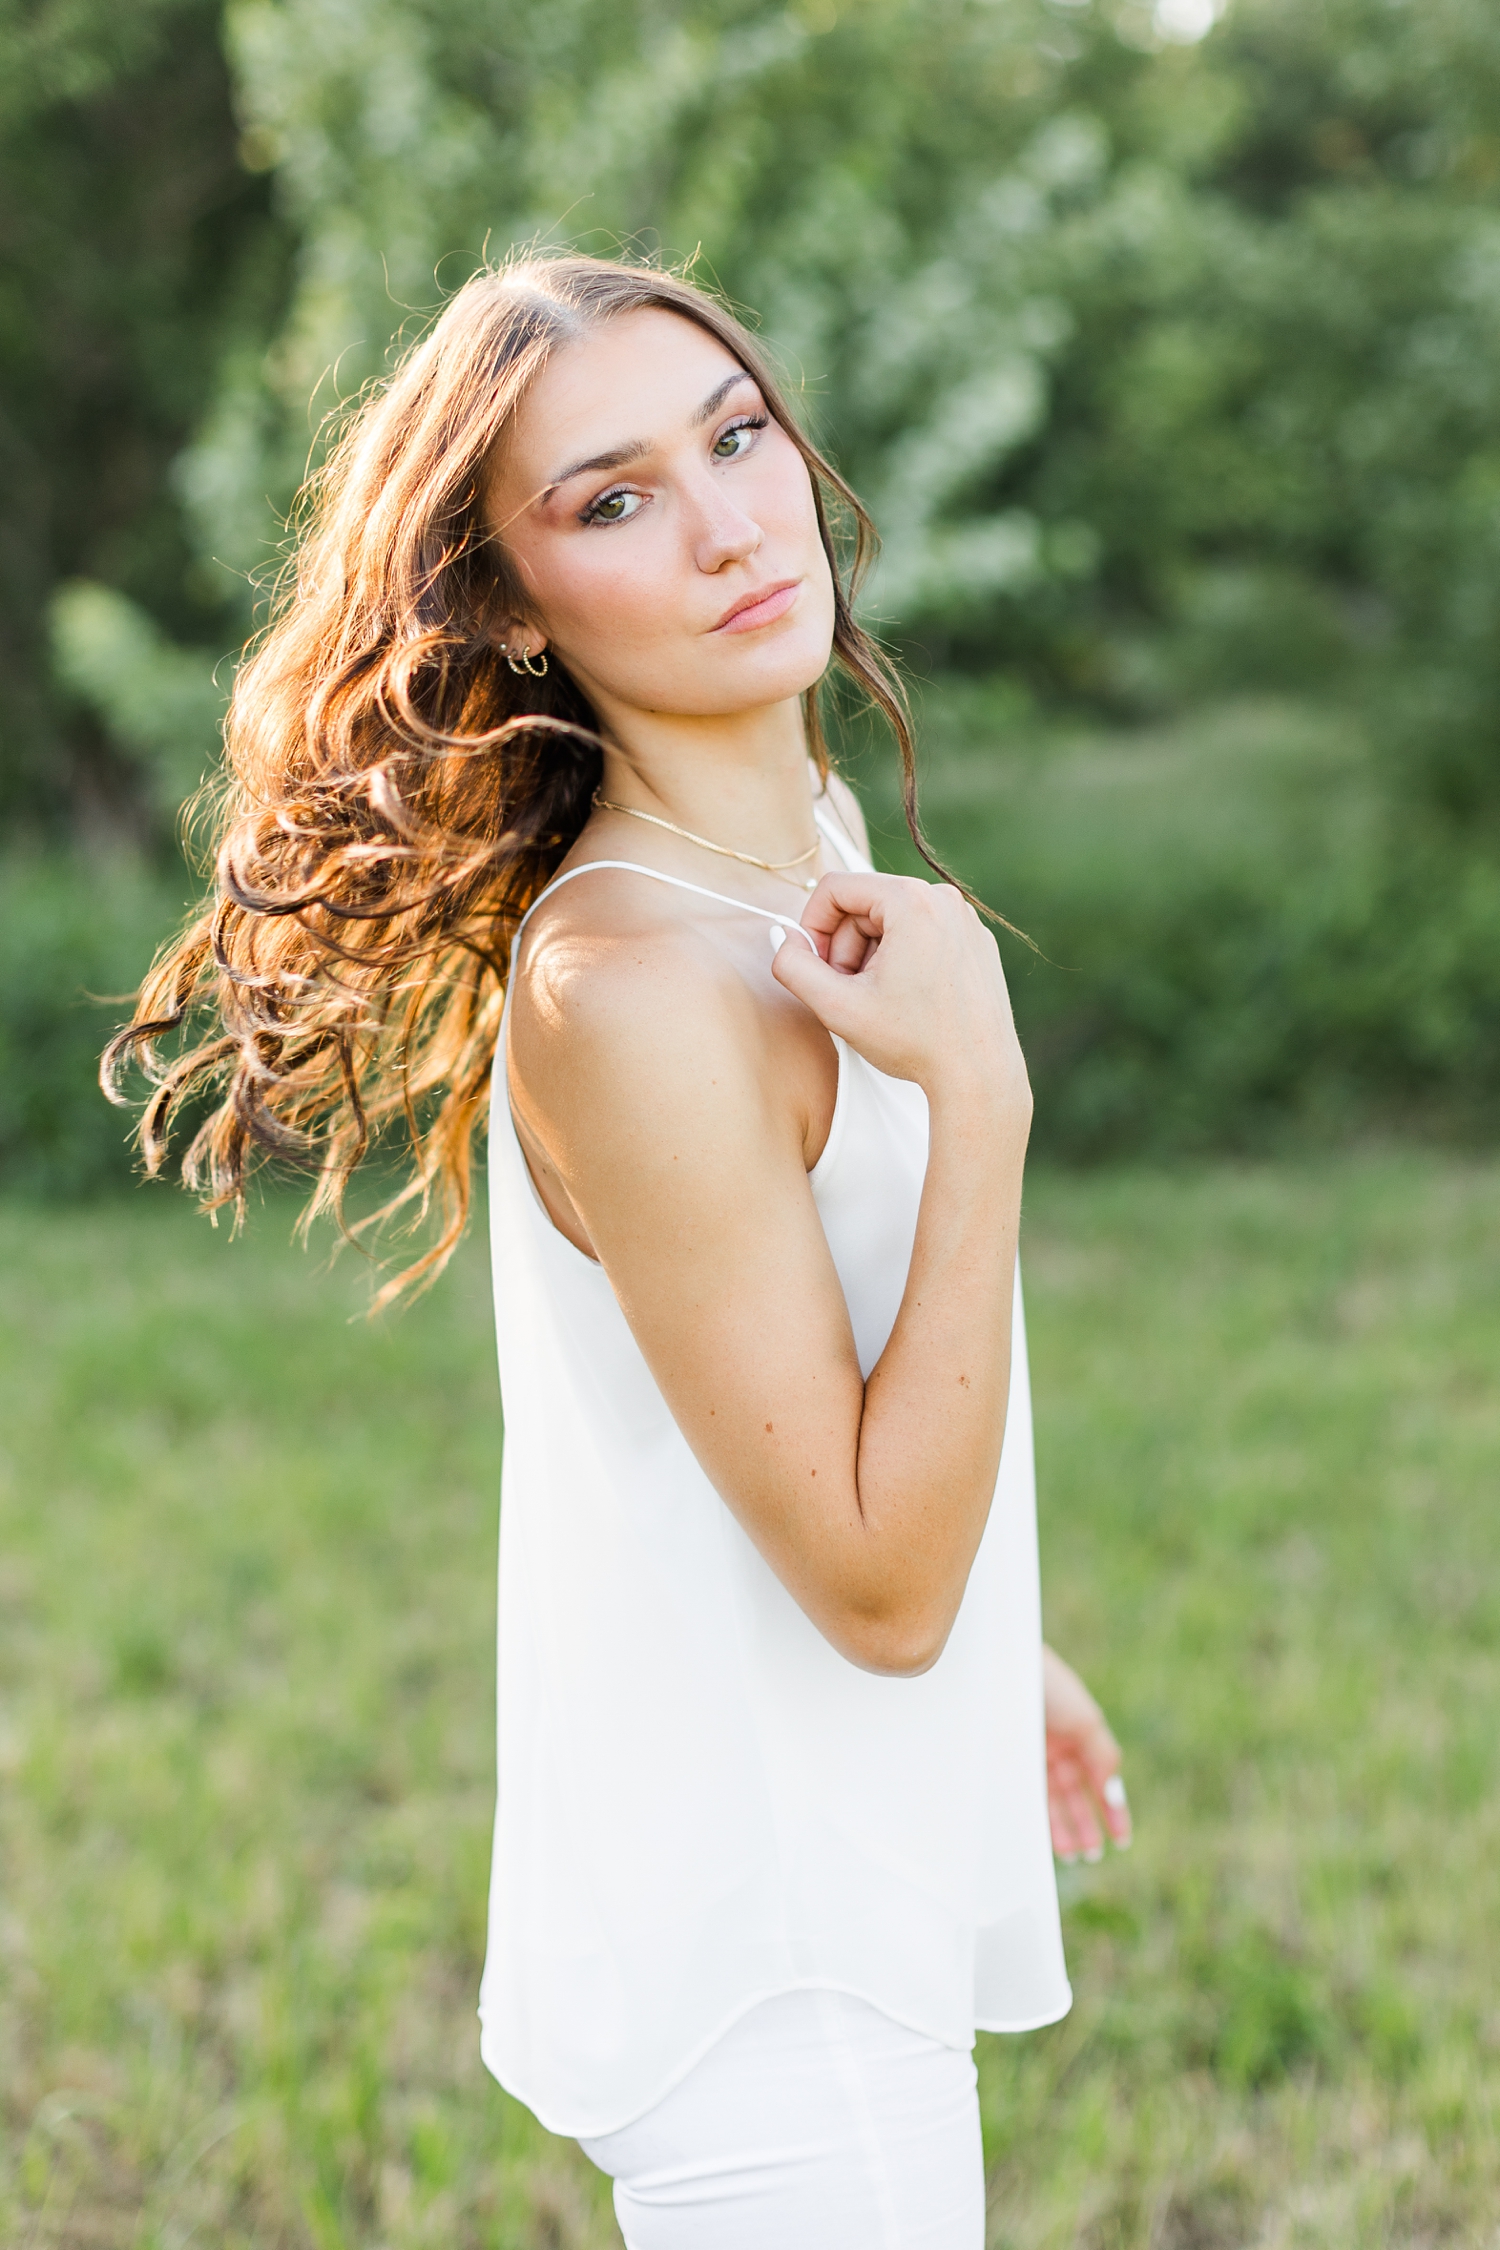 Mallory flips her hair around in a grassy field at sunset | CB Studio